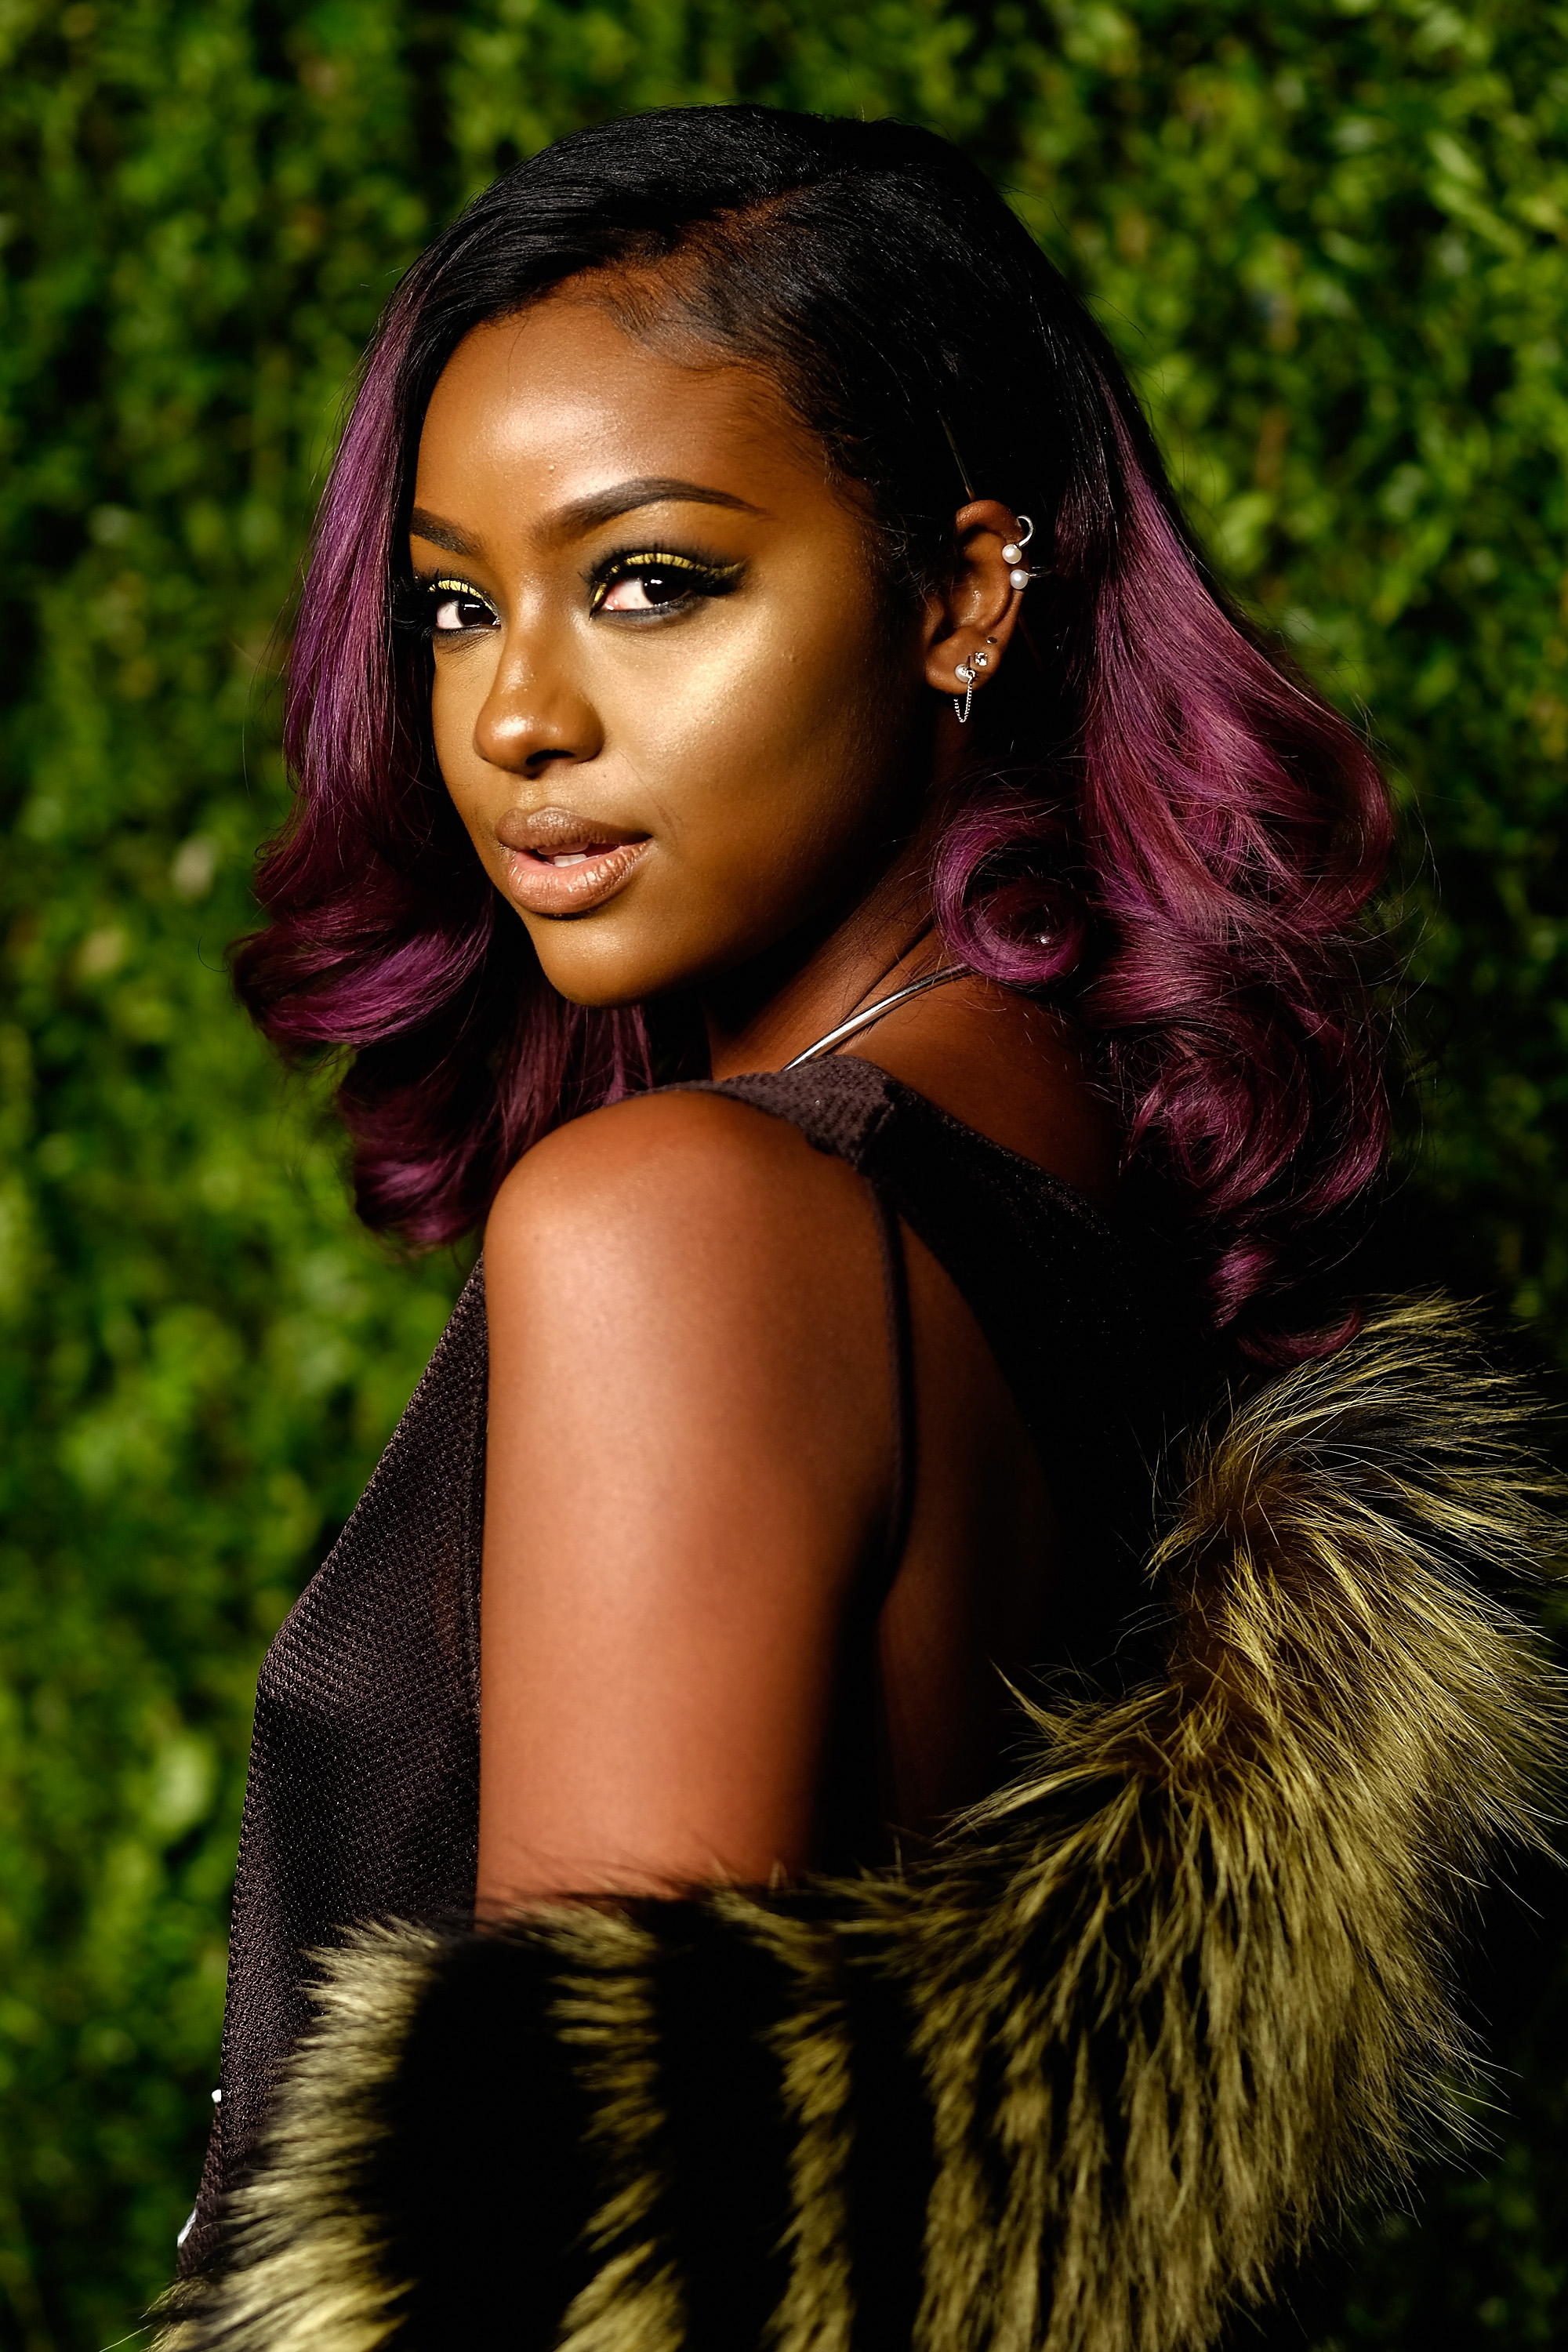 Singer Justine Skye attends 13th Annual CFDA/Vogue Fashion Fund Awards at Spring Studios on November 7, 2016 in New York City | Source: Getty Images